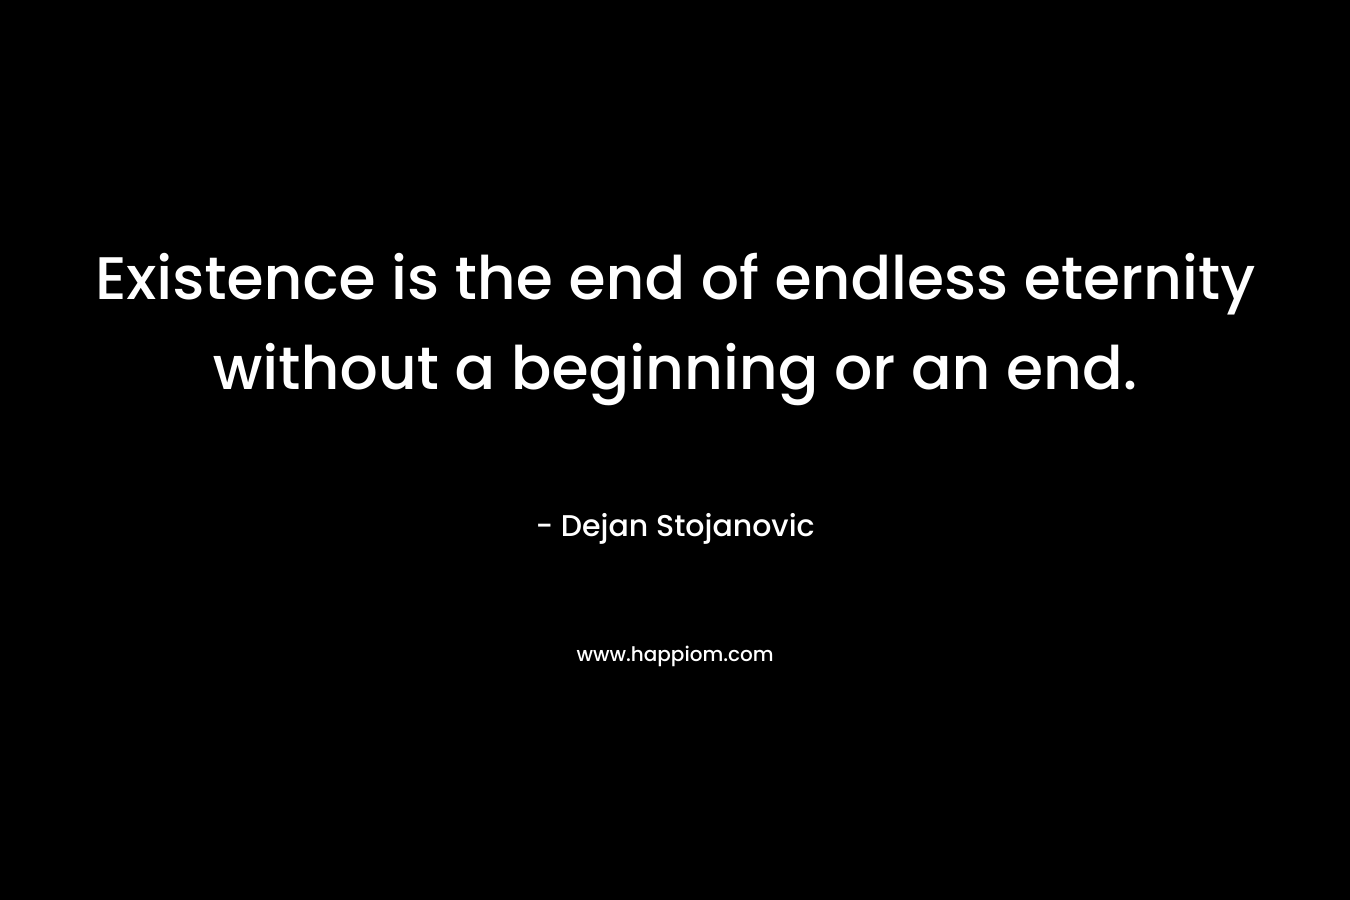 Existence is the end of endless eternity without a beginning or an end.